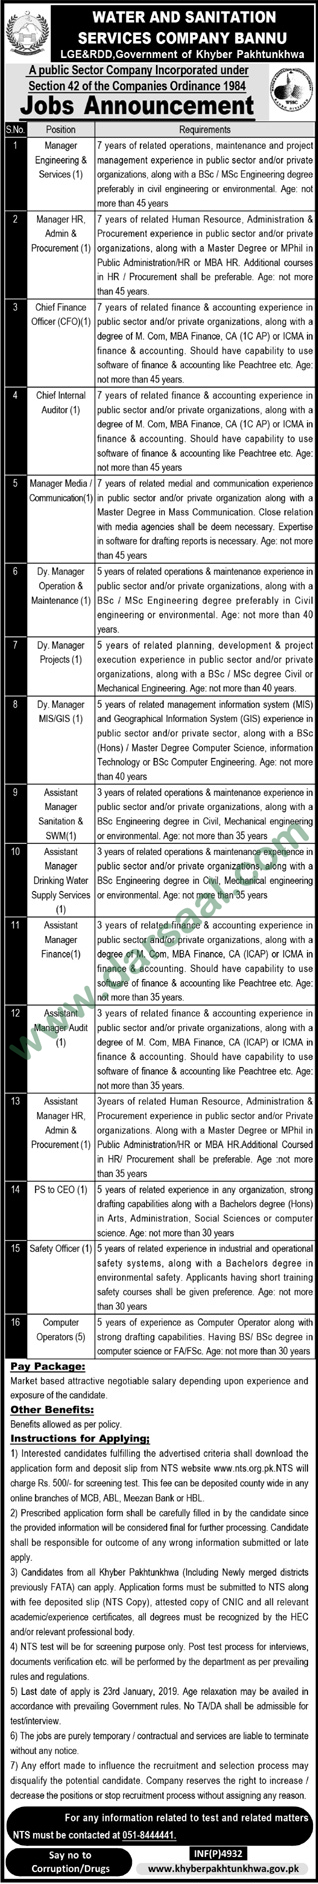 Finance Officer Jobs in Water & Sanitation Services Company Bannu in Bannu - Dec 27, 2018